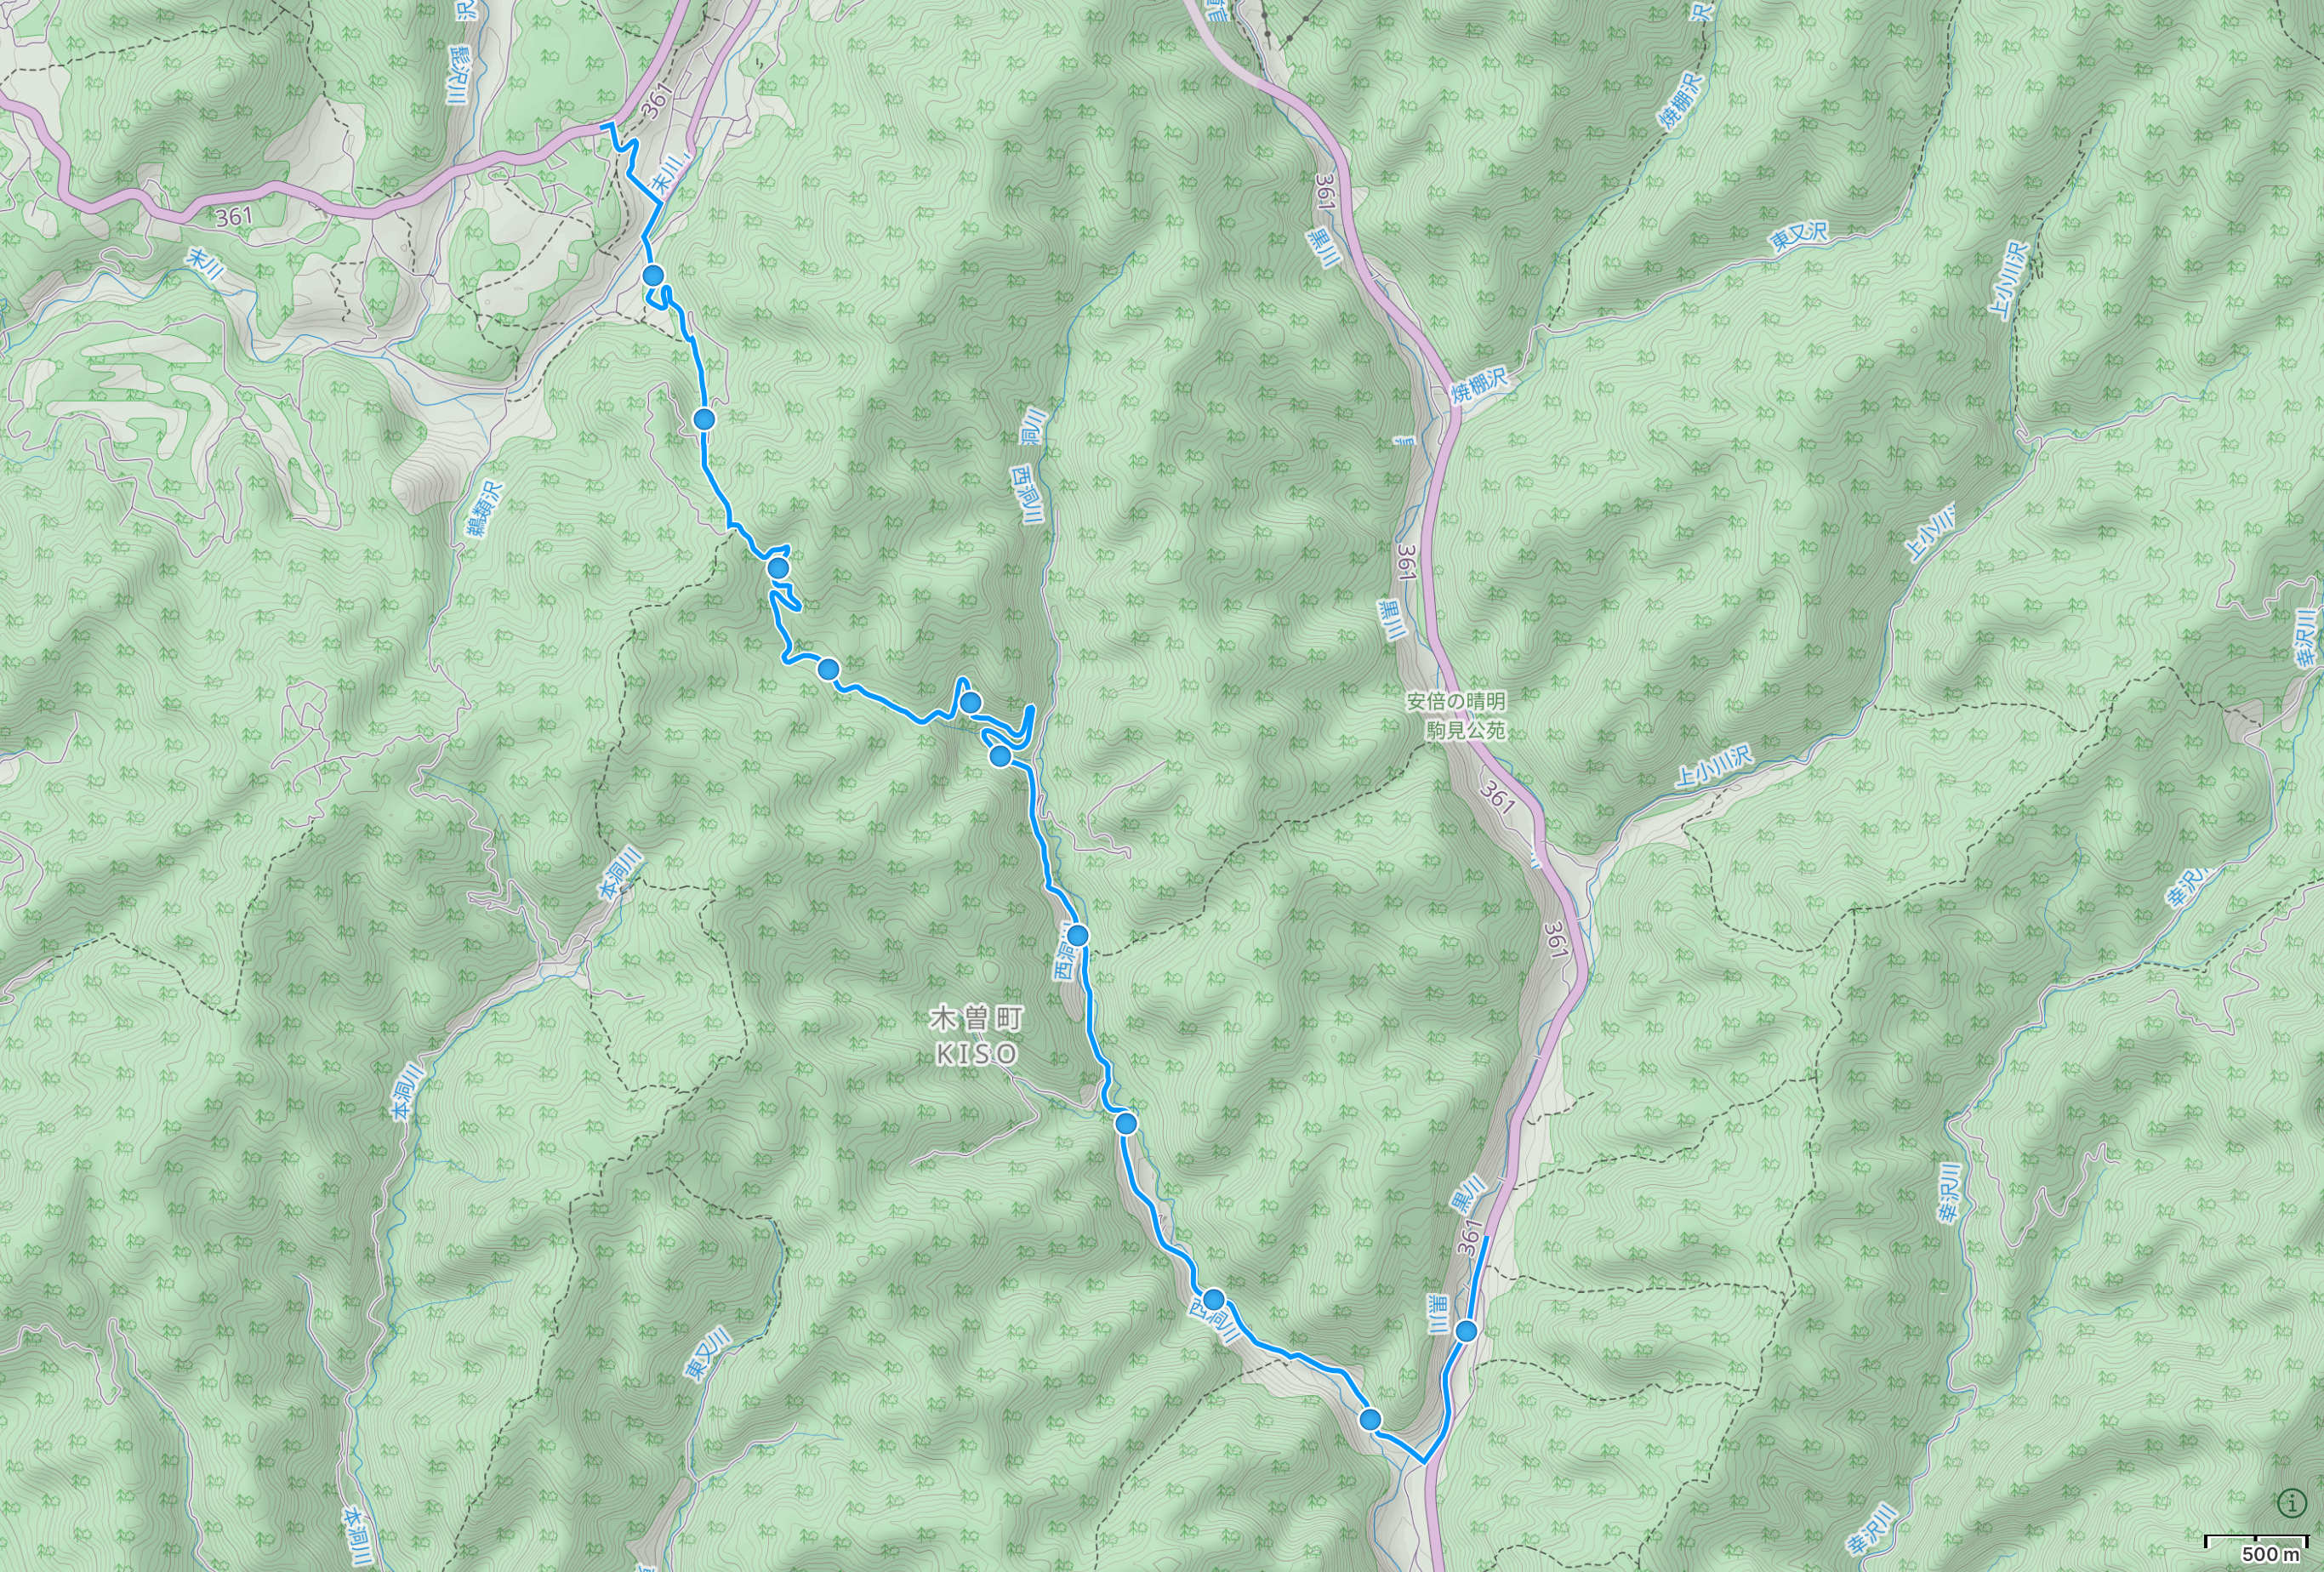 Map of Nagano with author’s route from Kaida Plateau to Kiso Fukushima highlighted.